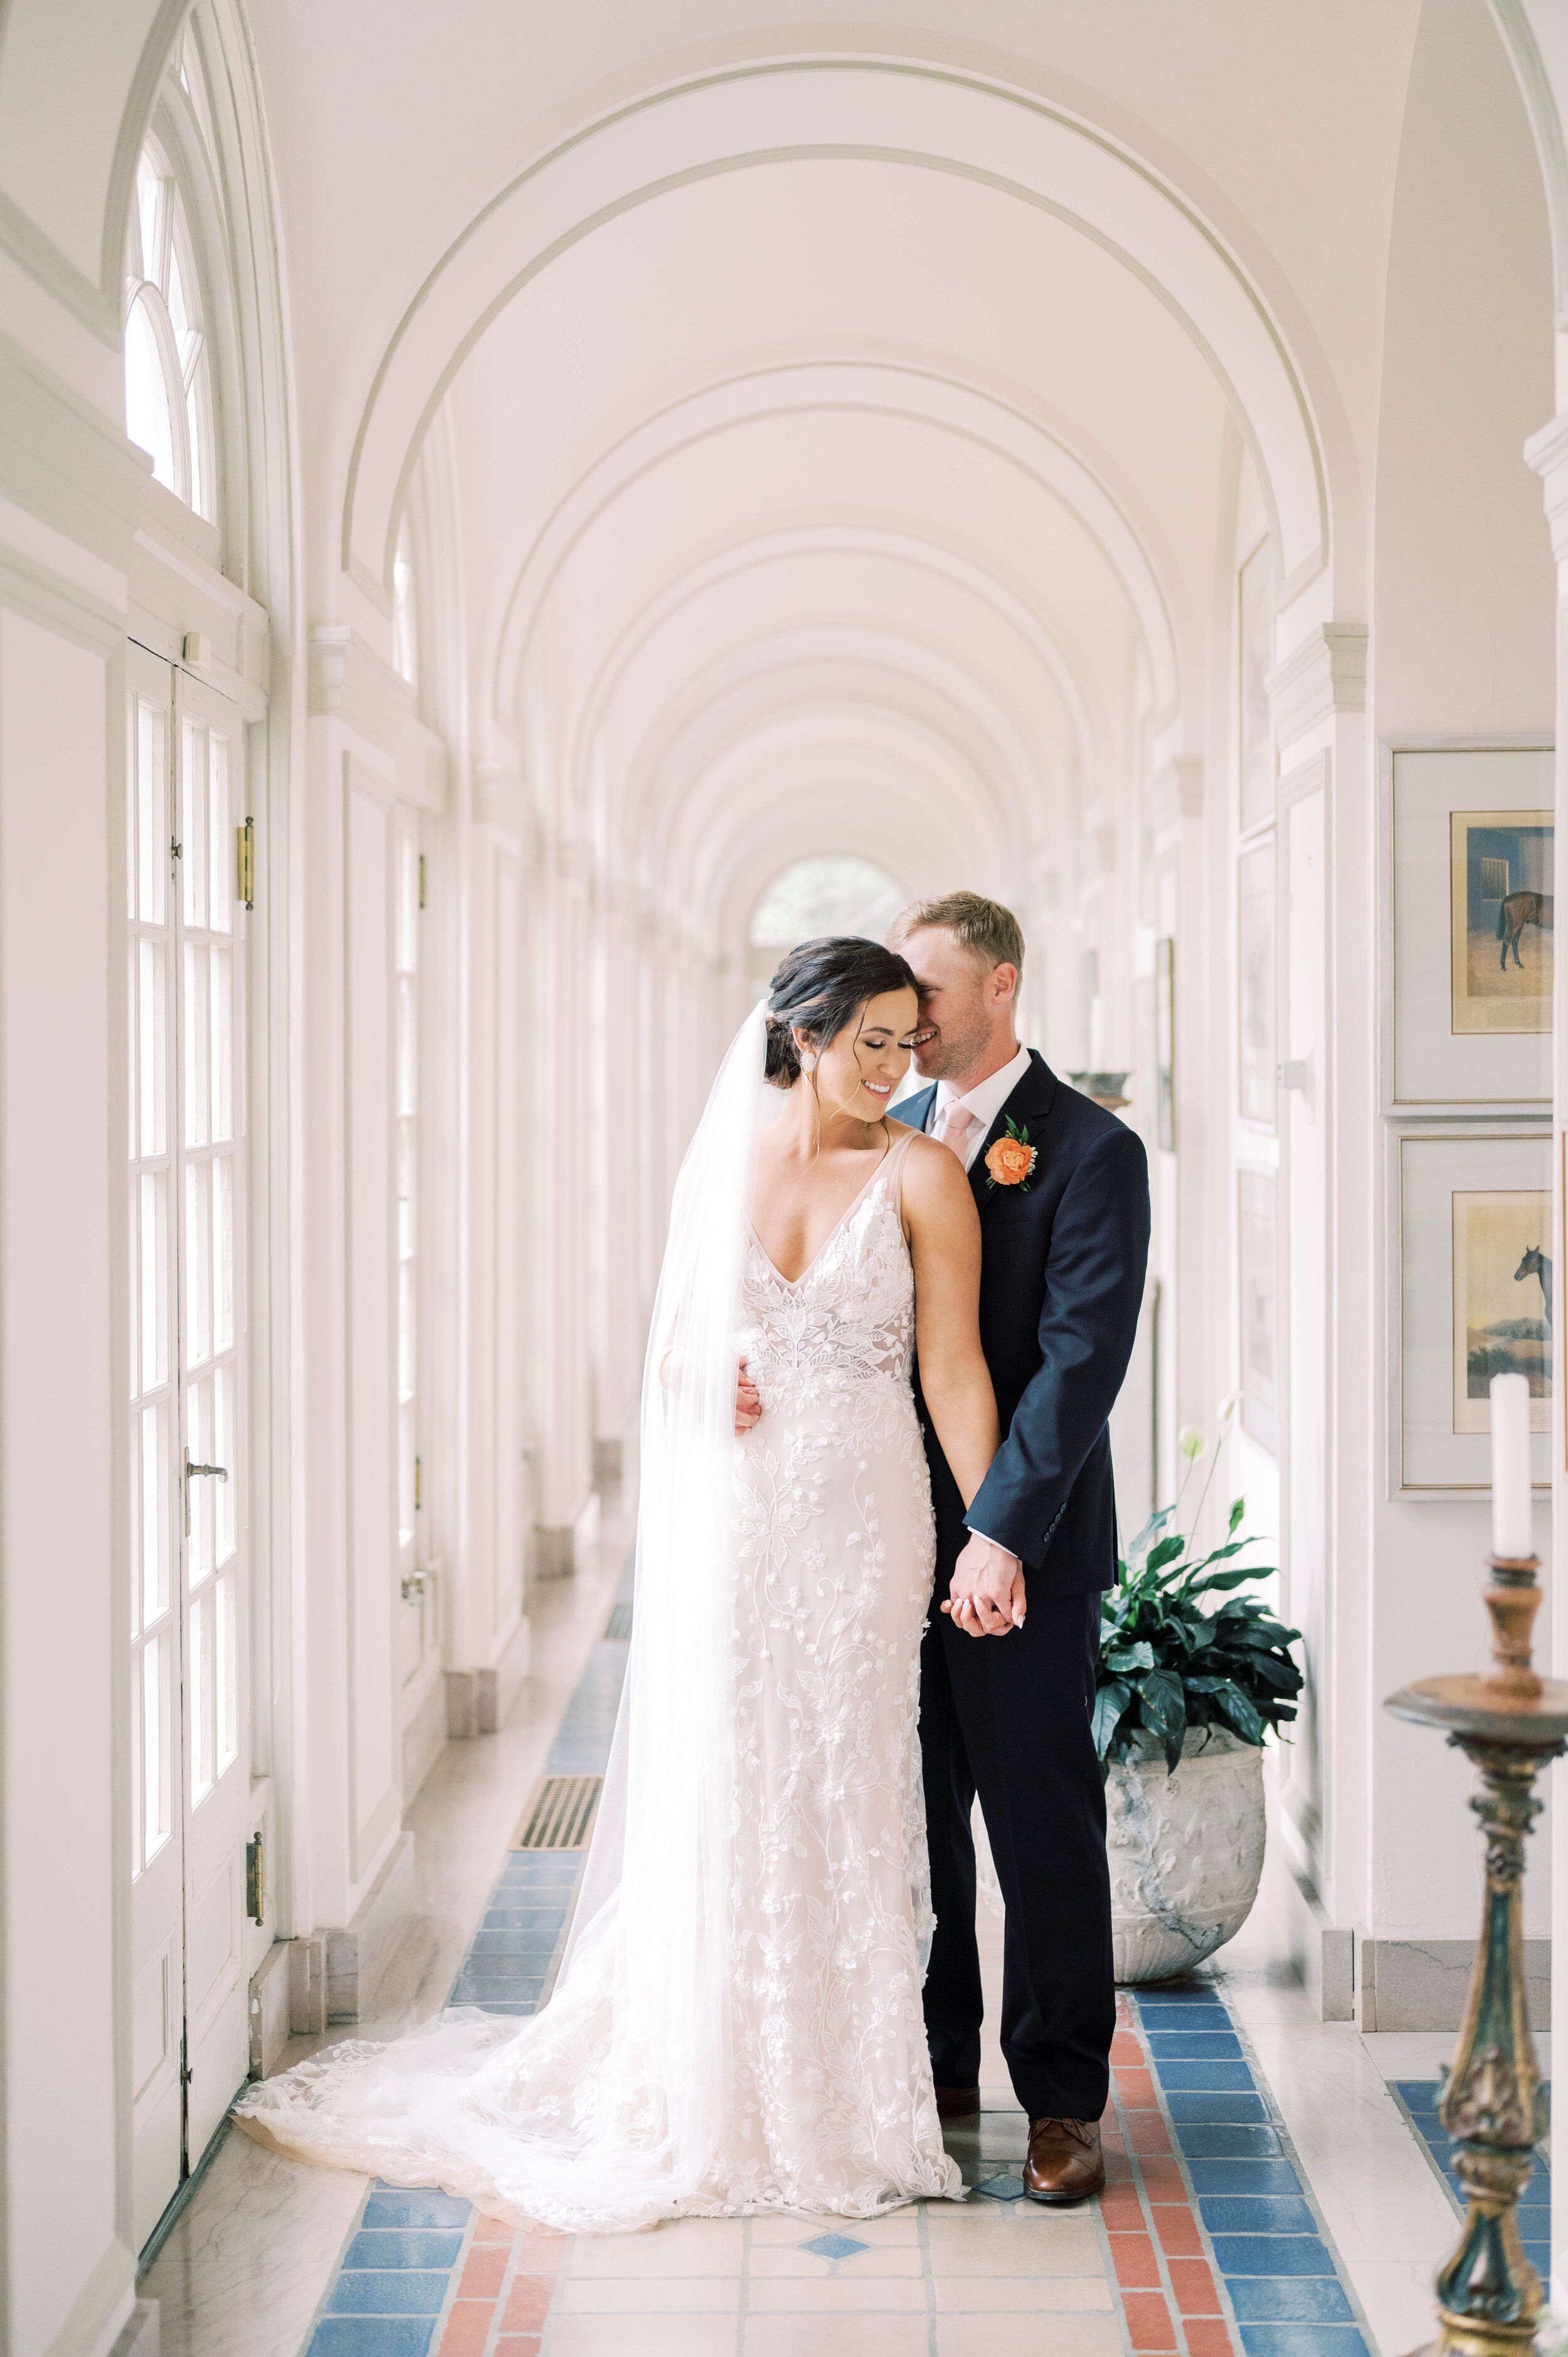 ivory-and-beau-blog-wedding-blog-ivory-and-beau-bride-madison-down-for-the-gown-made-with-love-wedding-dress-bridal-gown-wedding-gown-real-bride-real-wedding-bridal-shop-savannah-georgia-21Madison.Blake-321.jpg